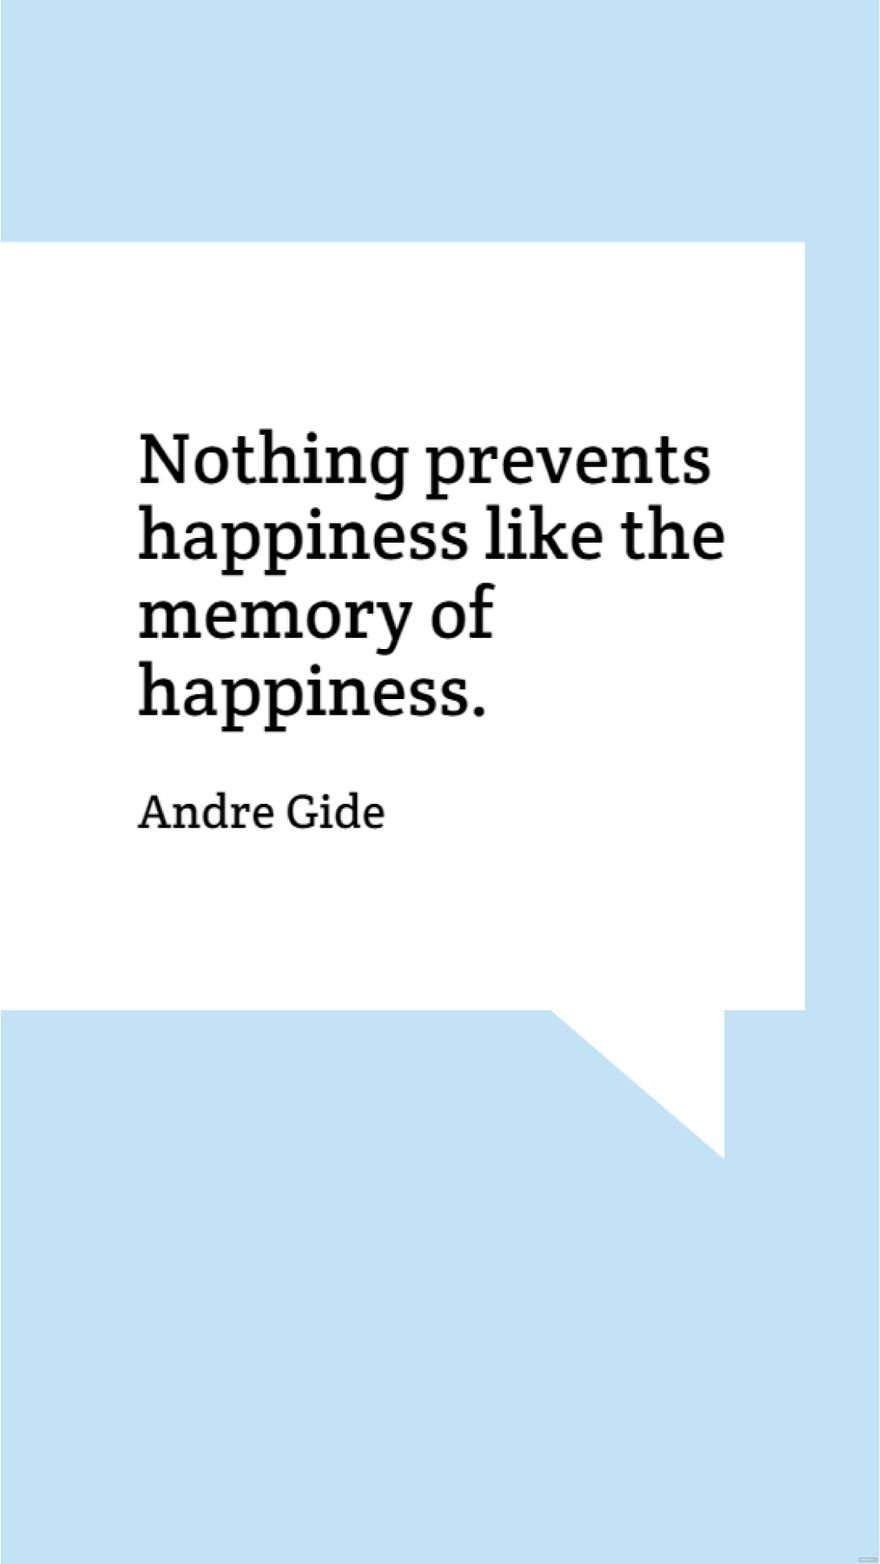 Free Andre Gide - Nothing prevents happiness like the memory of happiness. in JPG